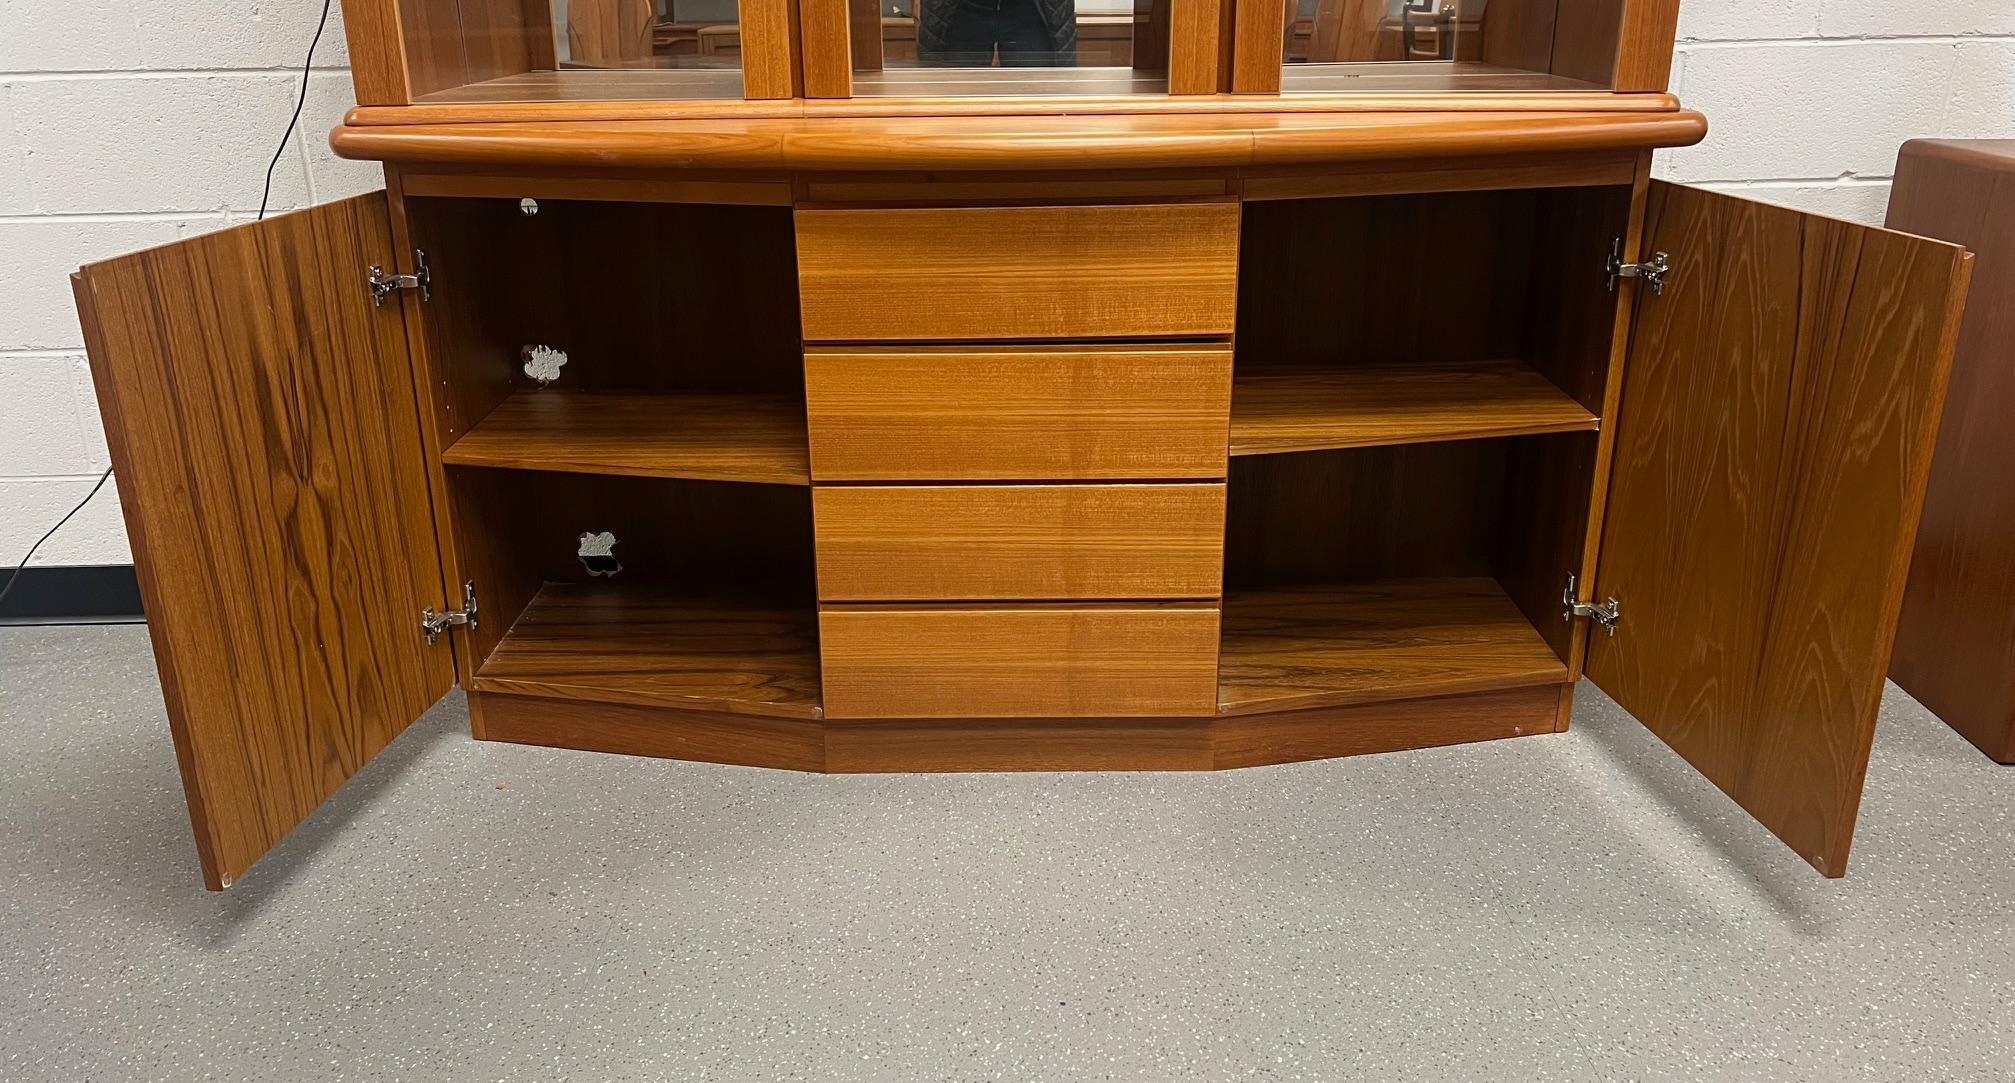 Gorgeous Danish Modern teak buffet with hutch. Curved top contrasted by bow front bottom.

Featuring adjustable glass shelves at the top. Adjustable wood shelves at the bottom and four clean drawers. Someone cut several holes into the back of the